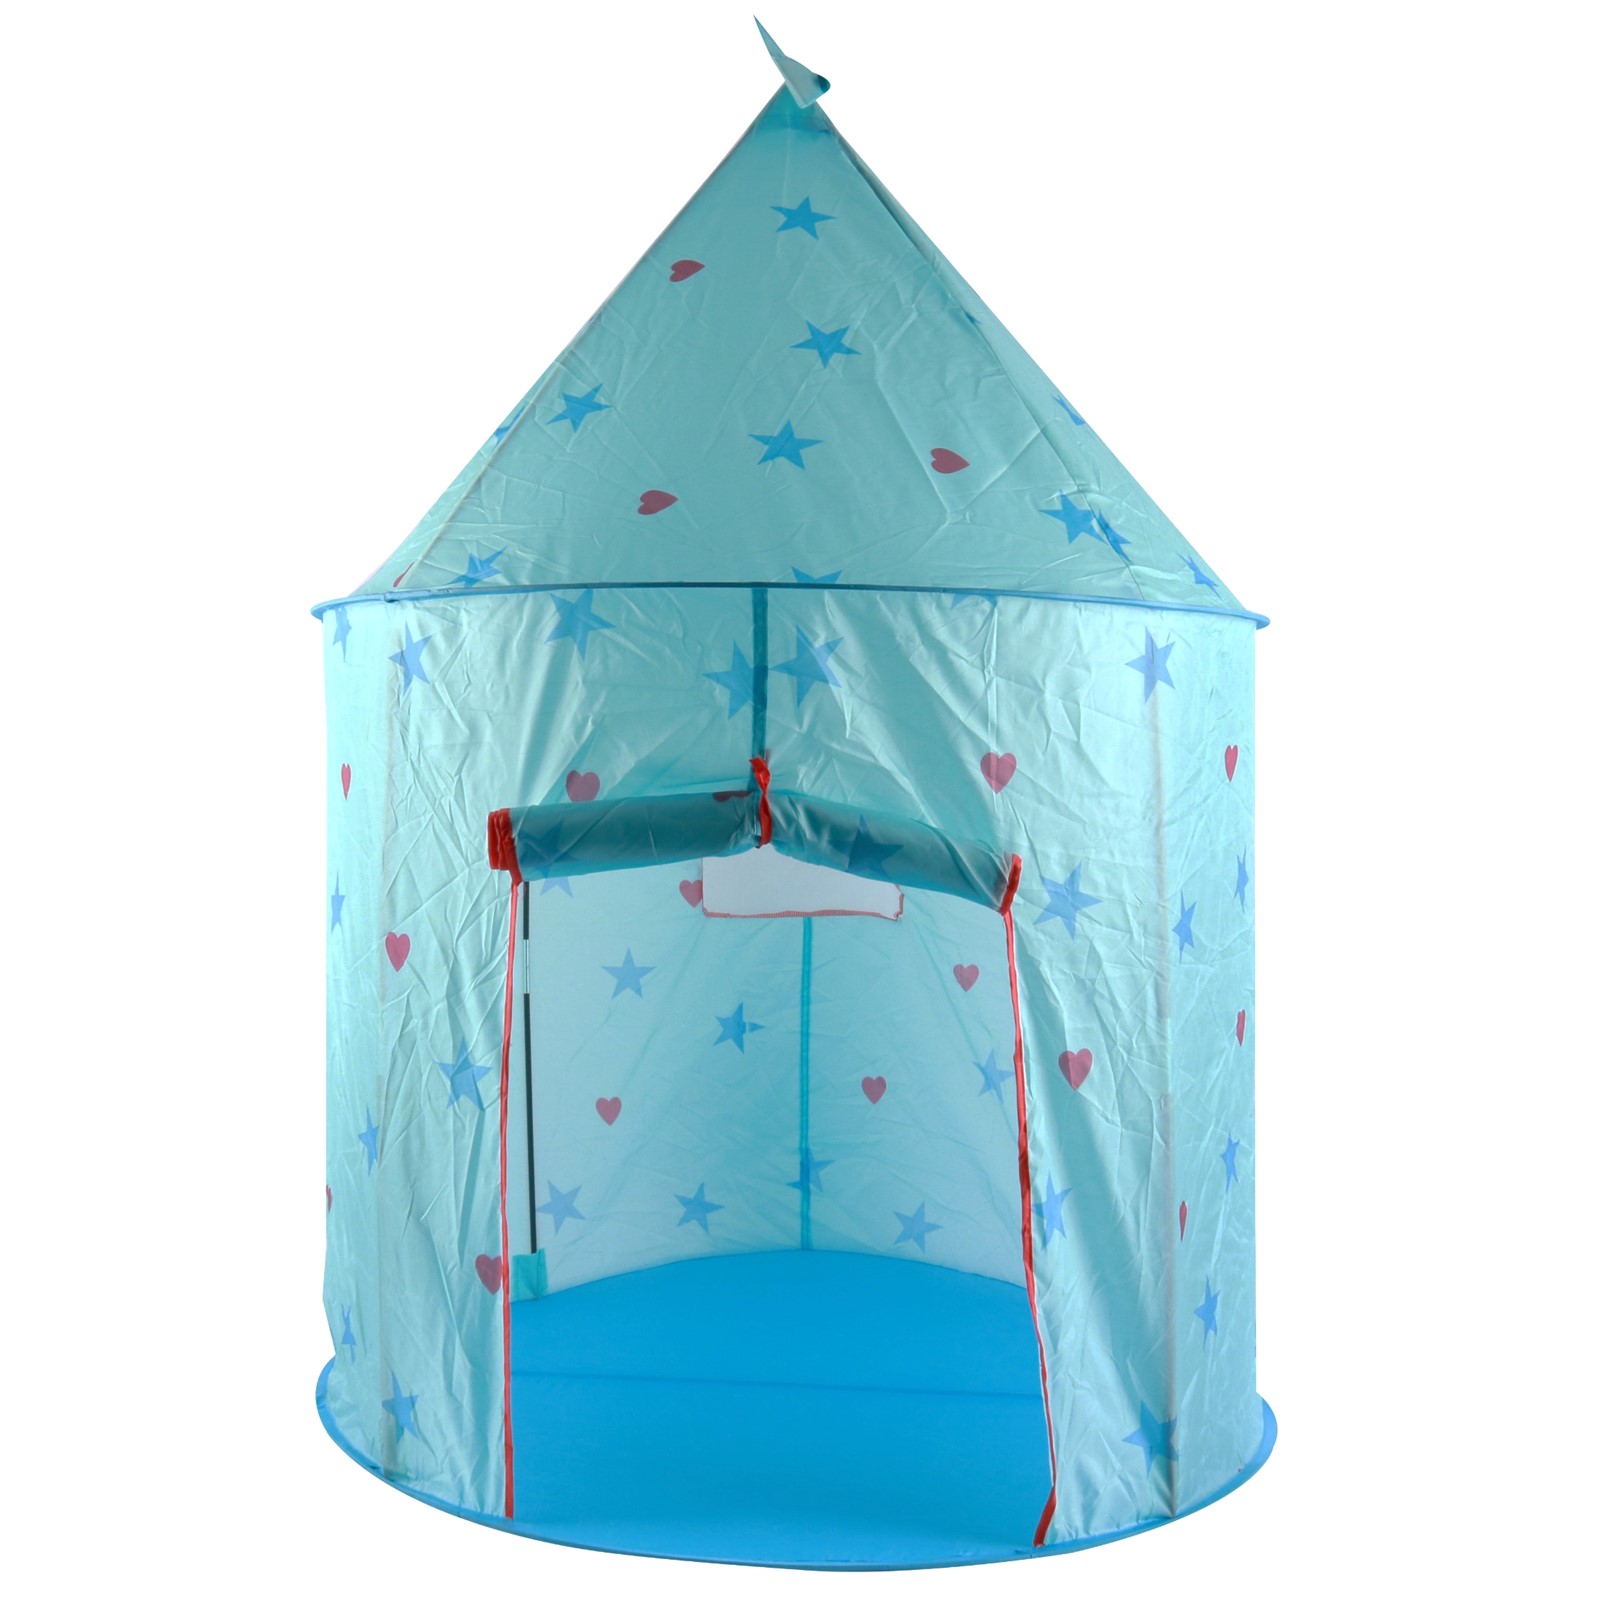 Vokodo Princess Castle Magical Play Tent with Stars Easy Folding Kids Blue Playhouse Boosts Imagination and Creativity Indoor Outdoor Adventure Toy House for Children Boys Girls Toddlers TO-11